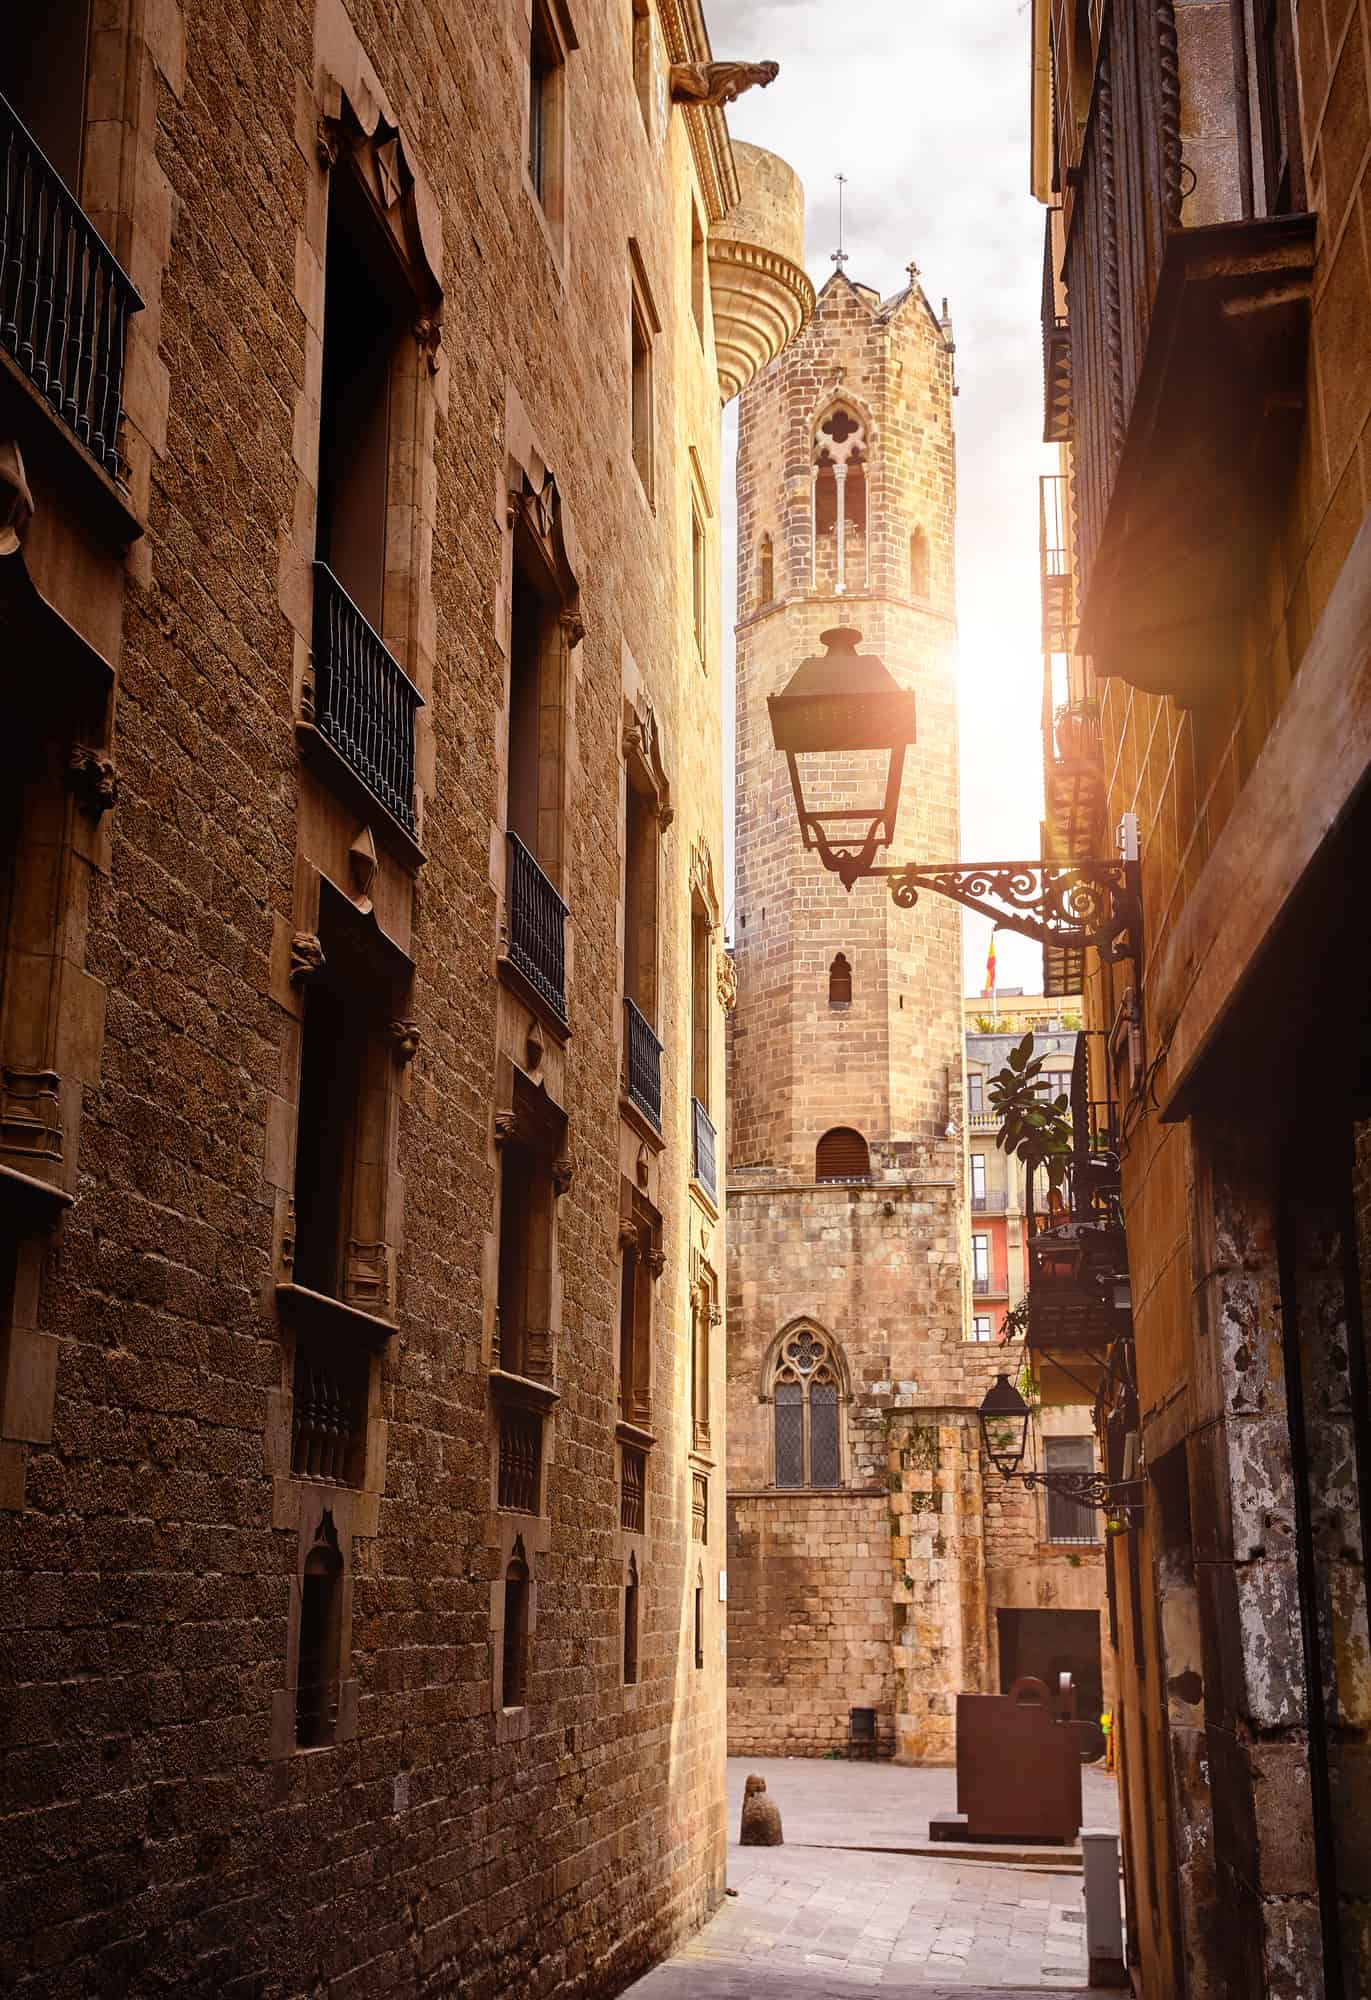 Gothic Quarter in Barcelona Catalonia Spain. Vew at ancient tower. Antique lamps on the narrow streets with medieval buildings. Ancient architecture of old town stone houses. Evening sky and antique street lanterns